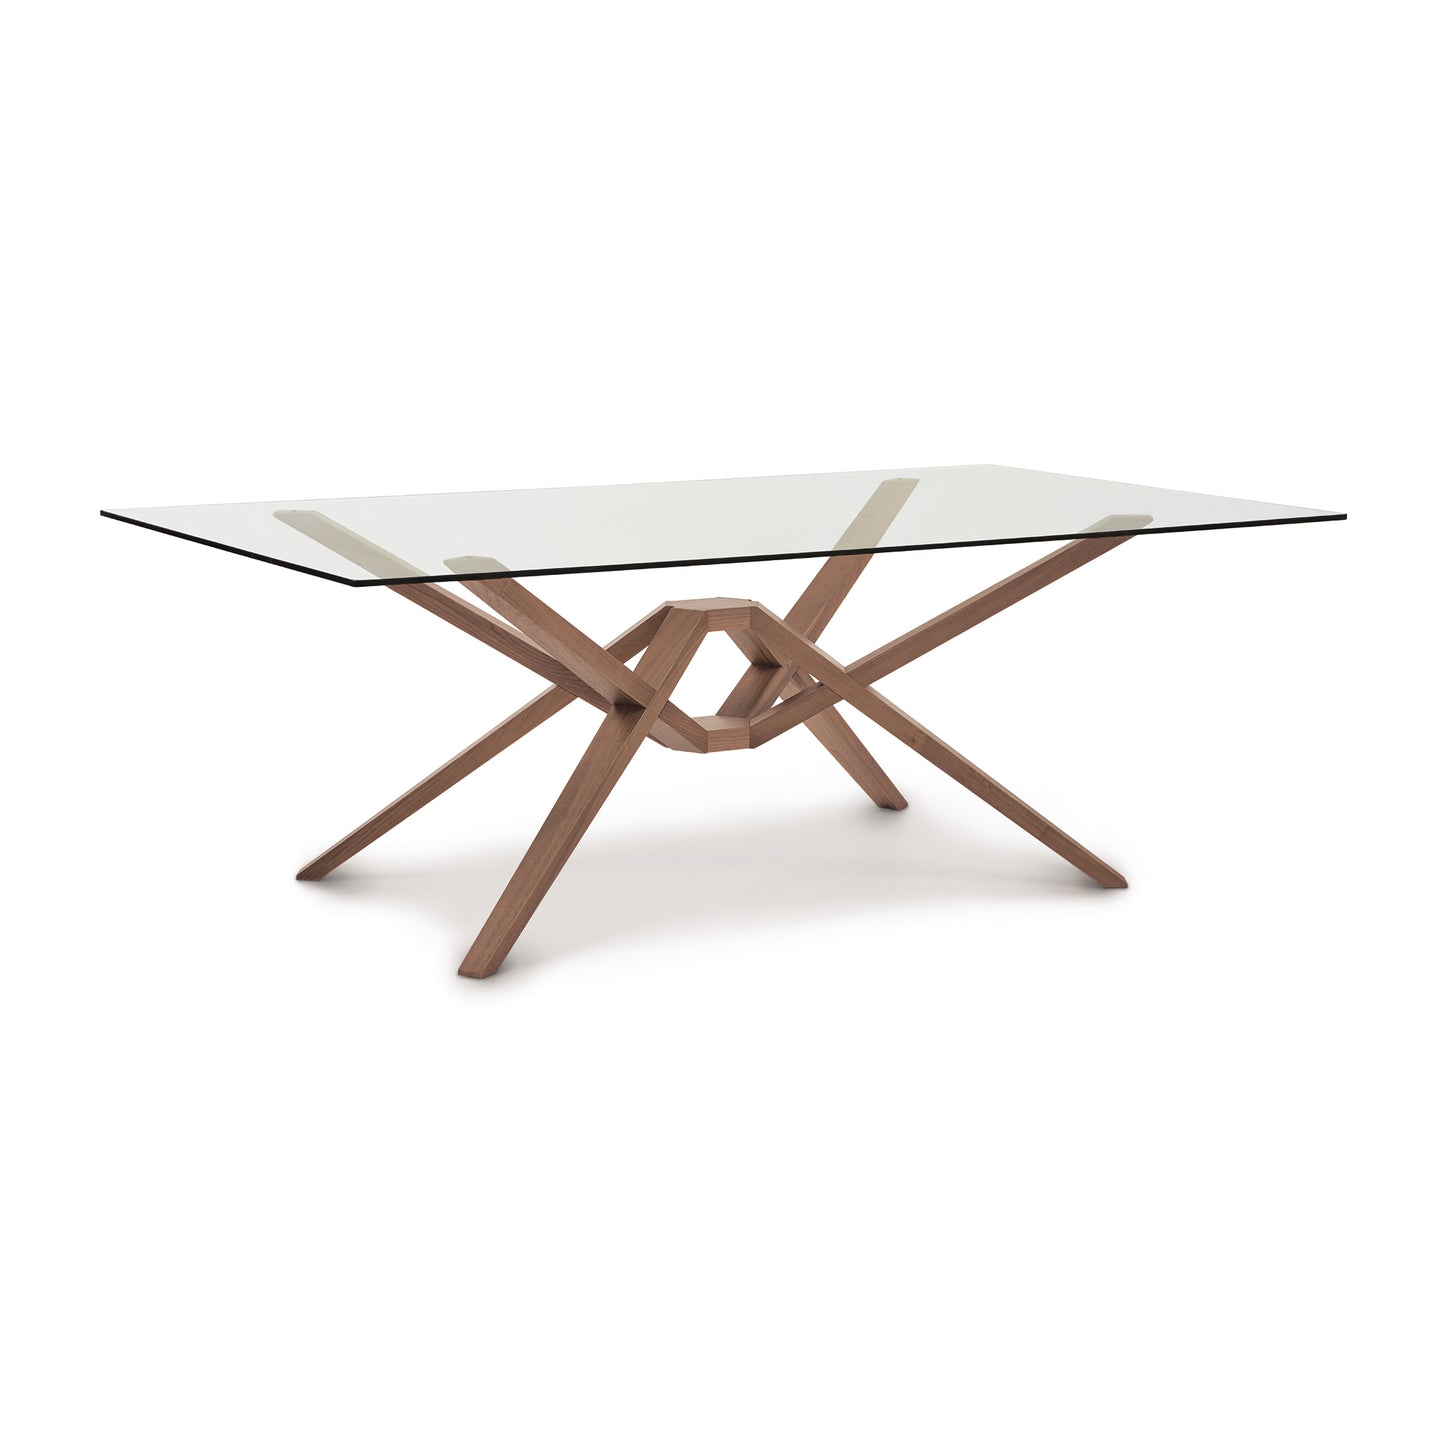 An Copeland Furniture Exeter Rectangular Glass Top Table featuring a solid wood, intersecting base structure against a white background.